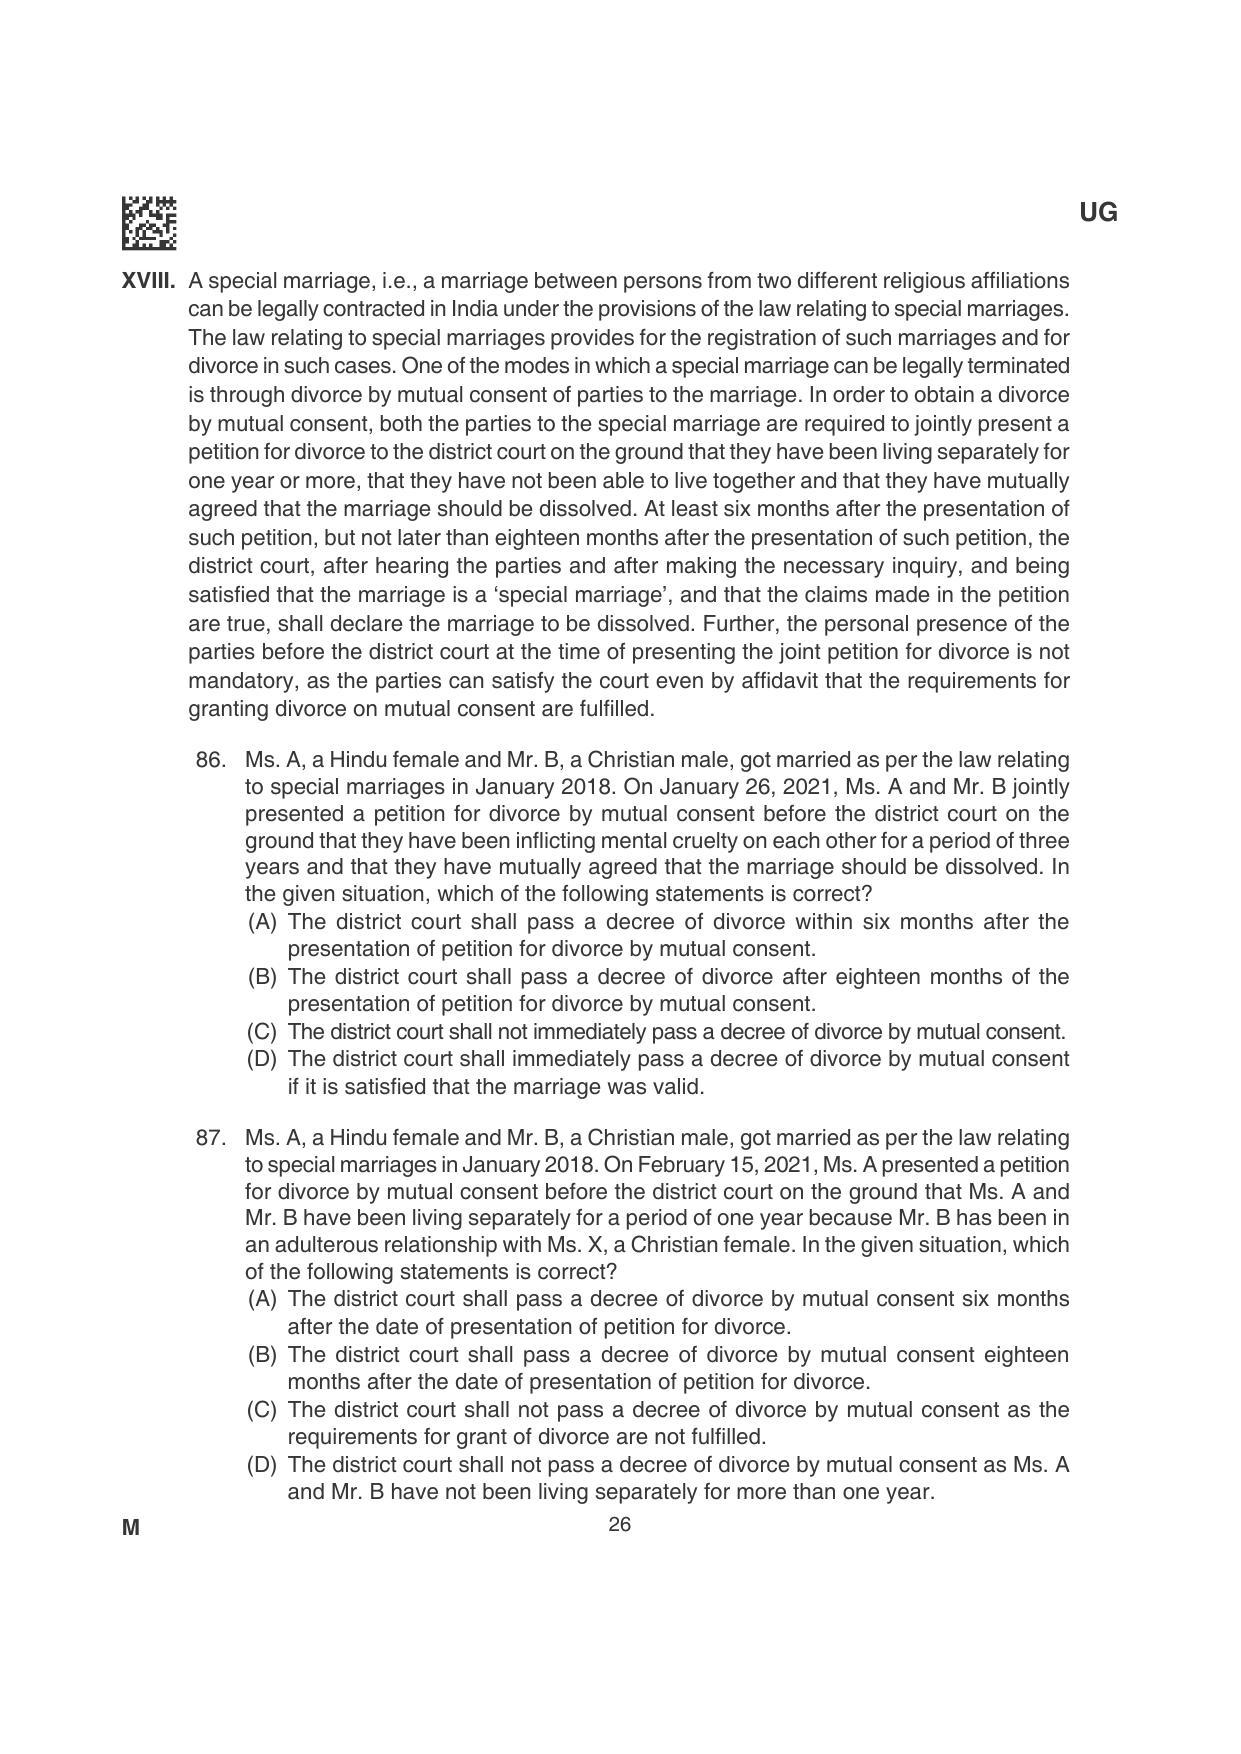 CLAT 2022 UG Question Papers - Page 26